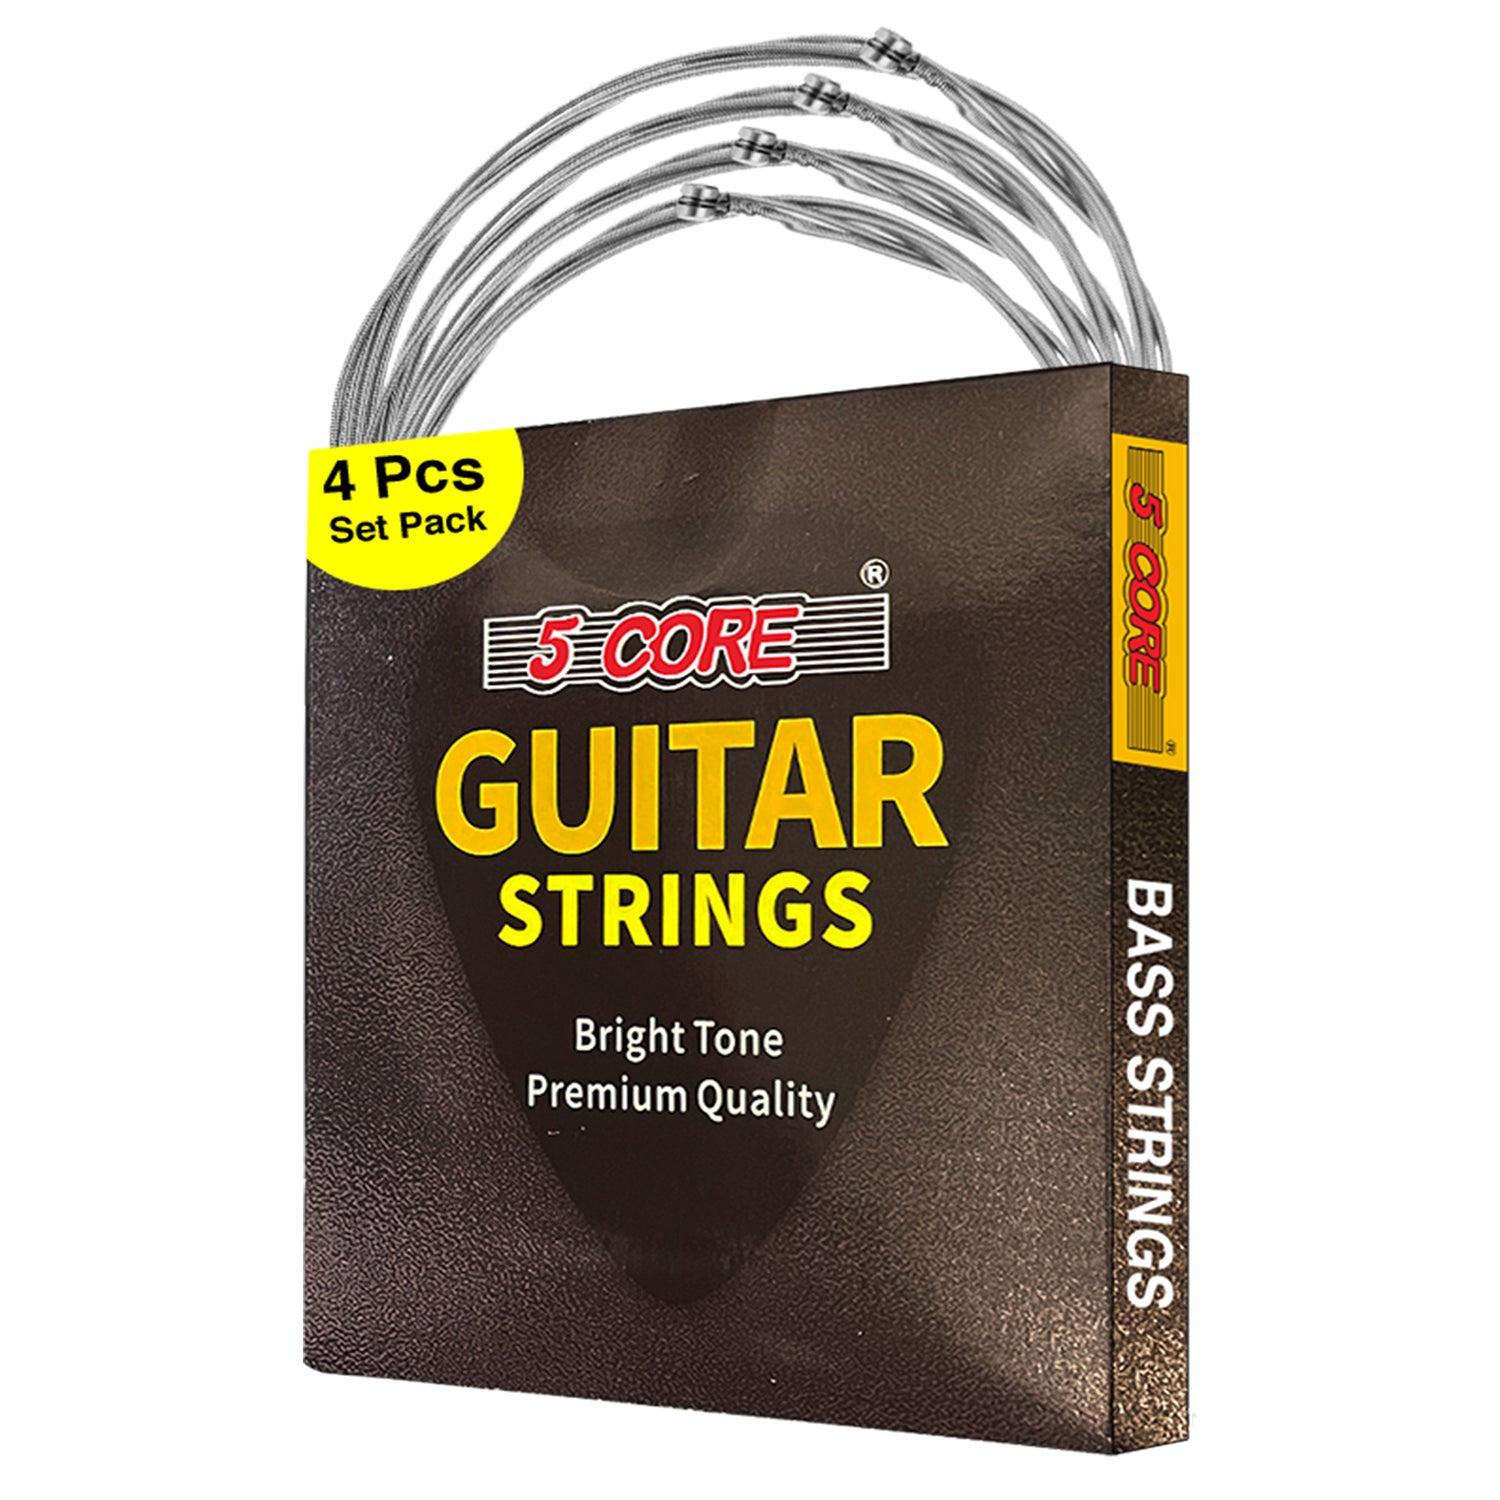 5Core Bass Guitar Strings 0.010-.048 Gauge w Deep Bright Tone for 6 String Electric Guitars 4/5/6 Pc